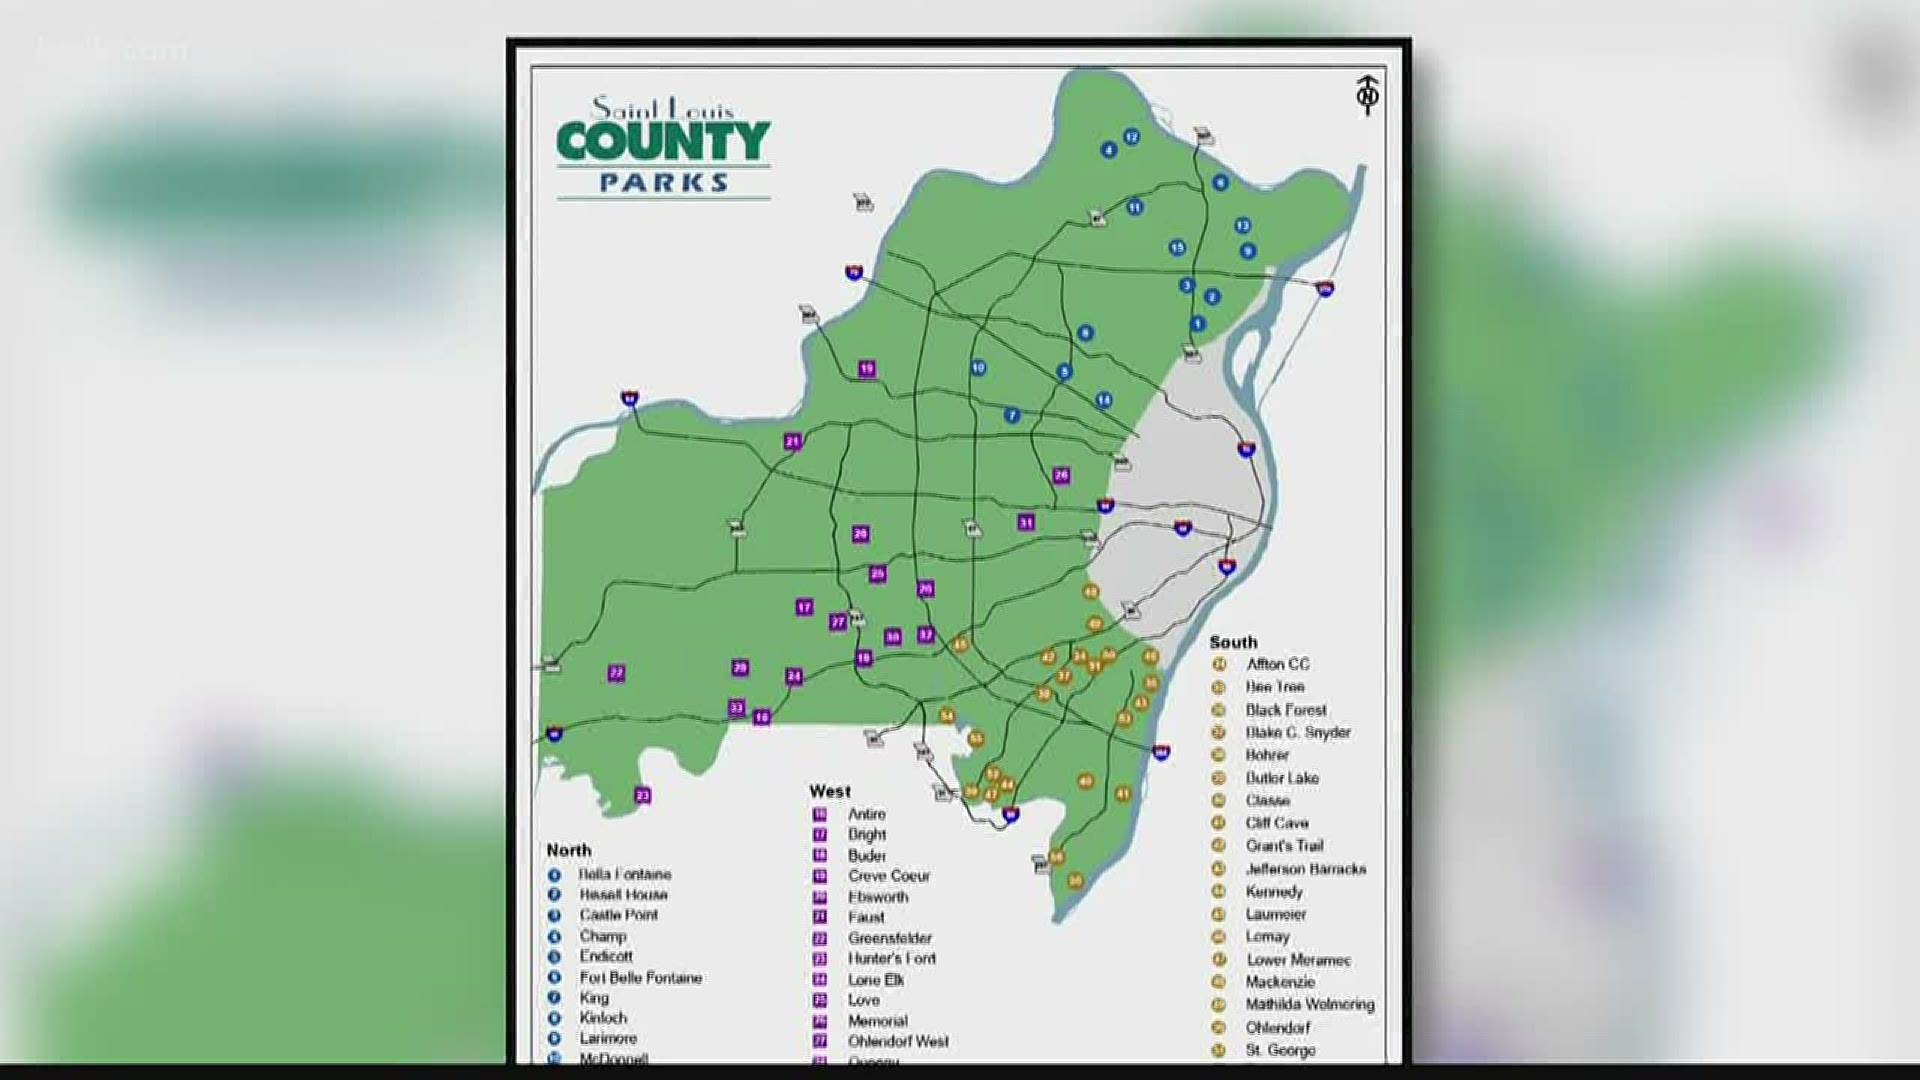 County parks have been closed since April 3